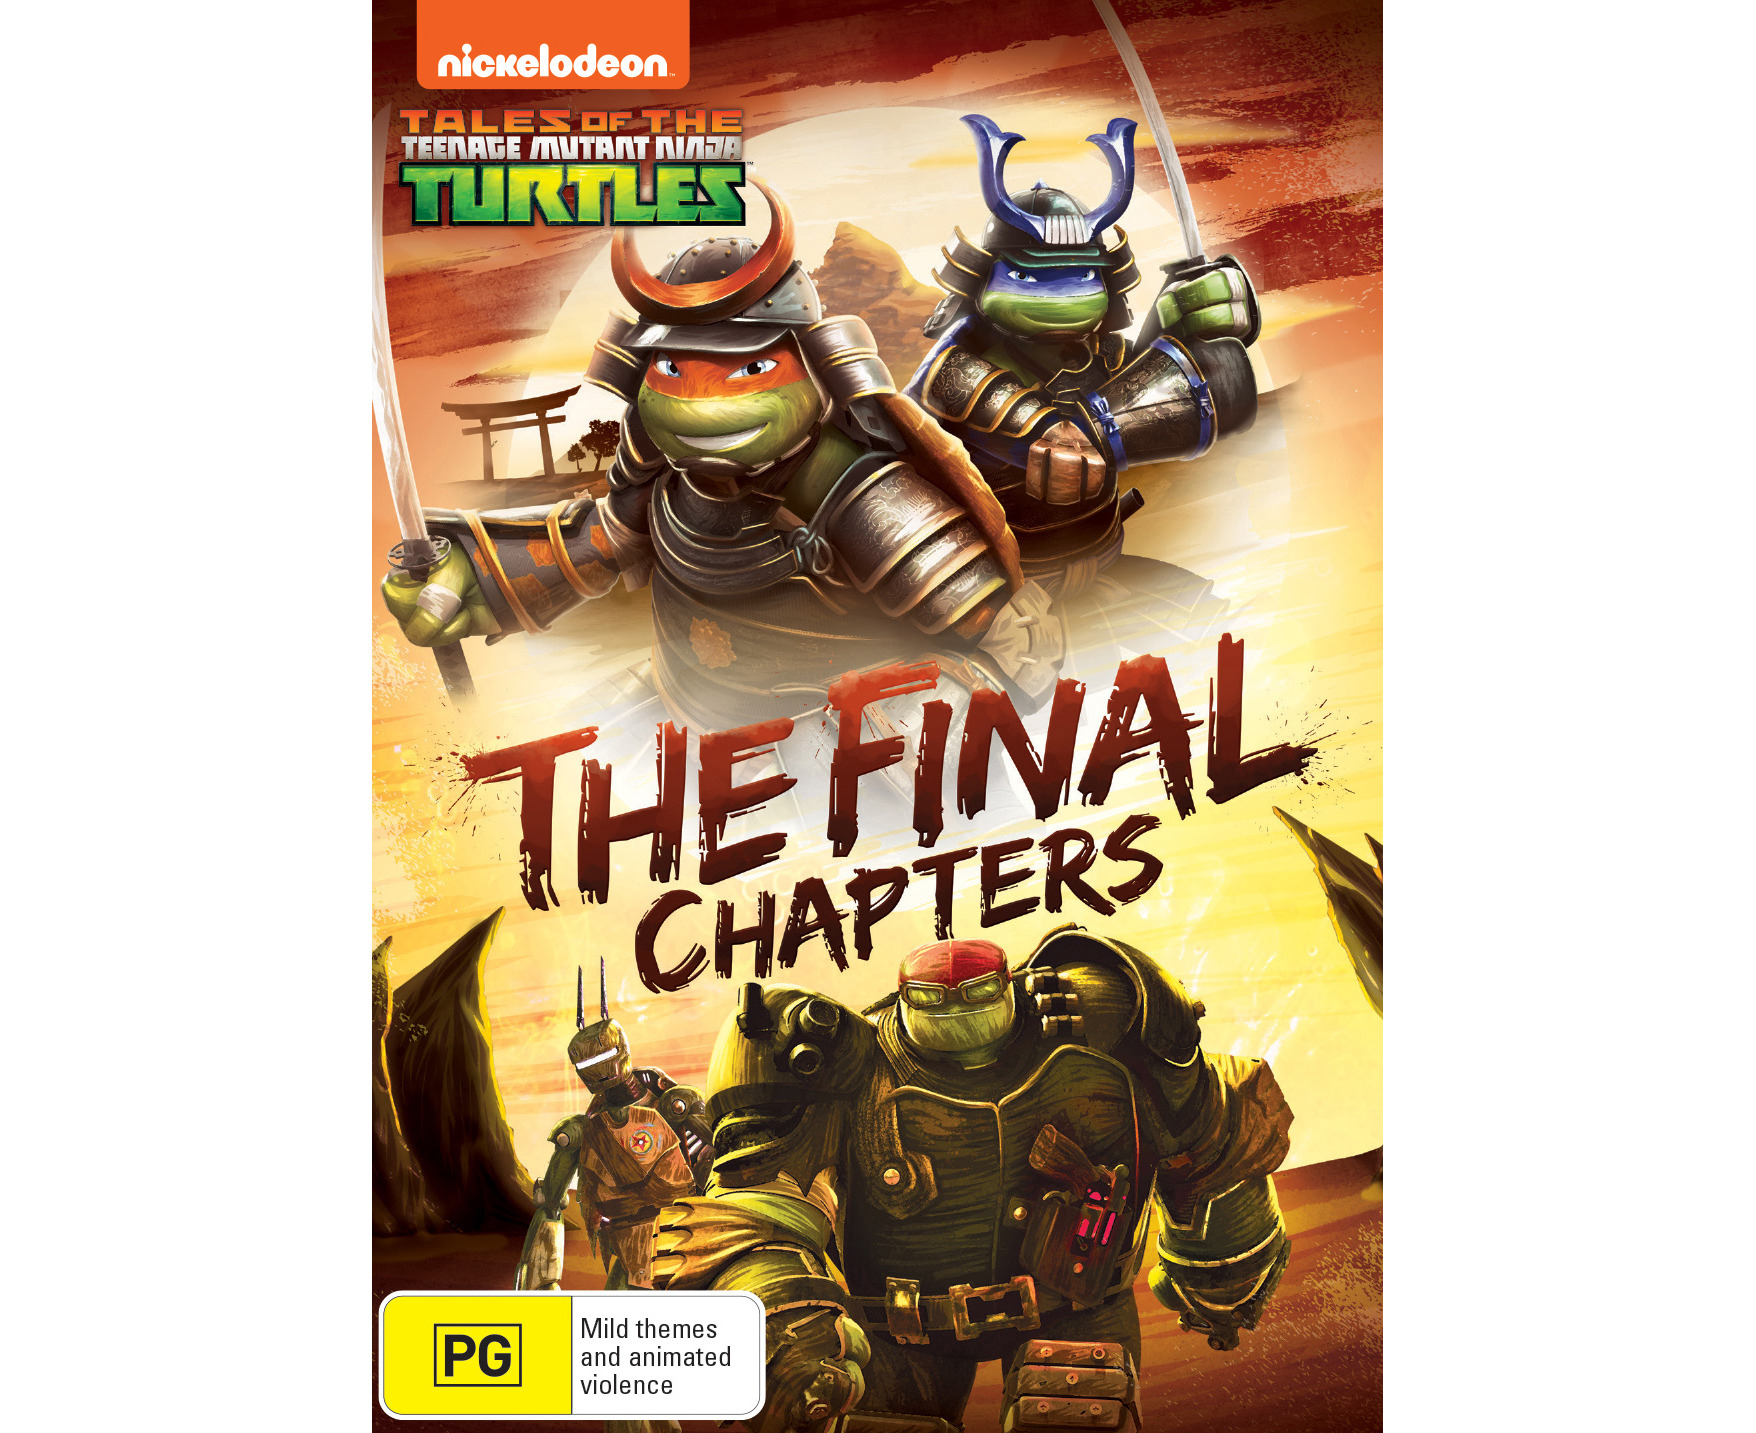 tmnt final chapters